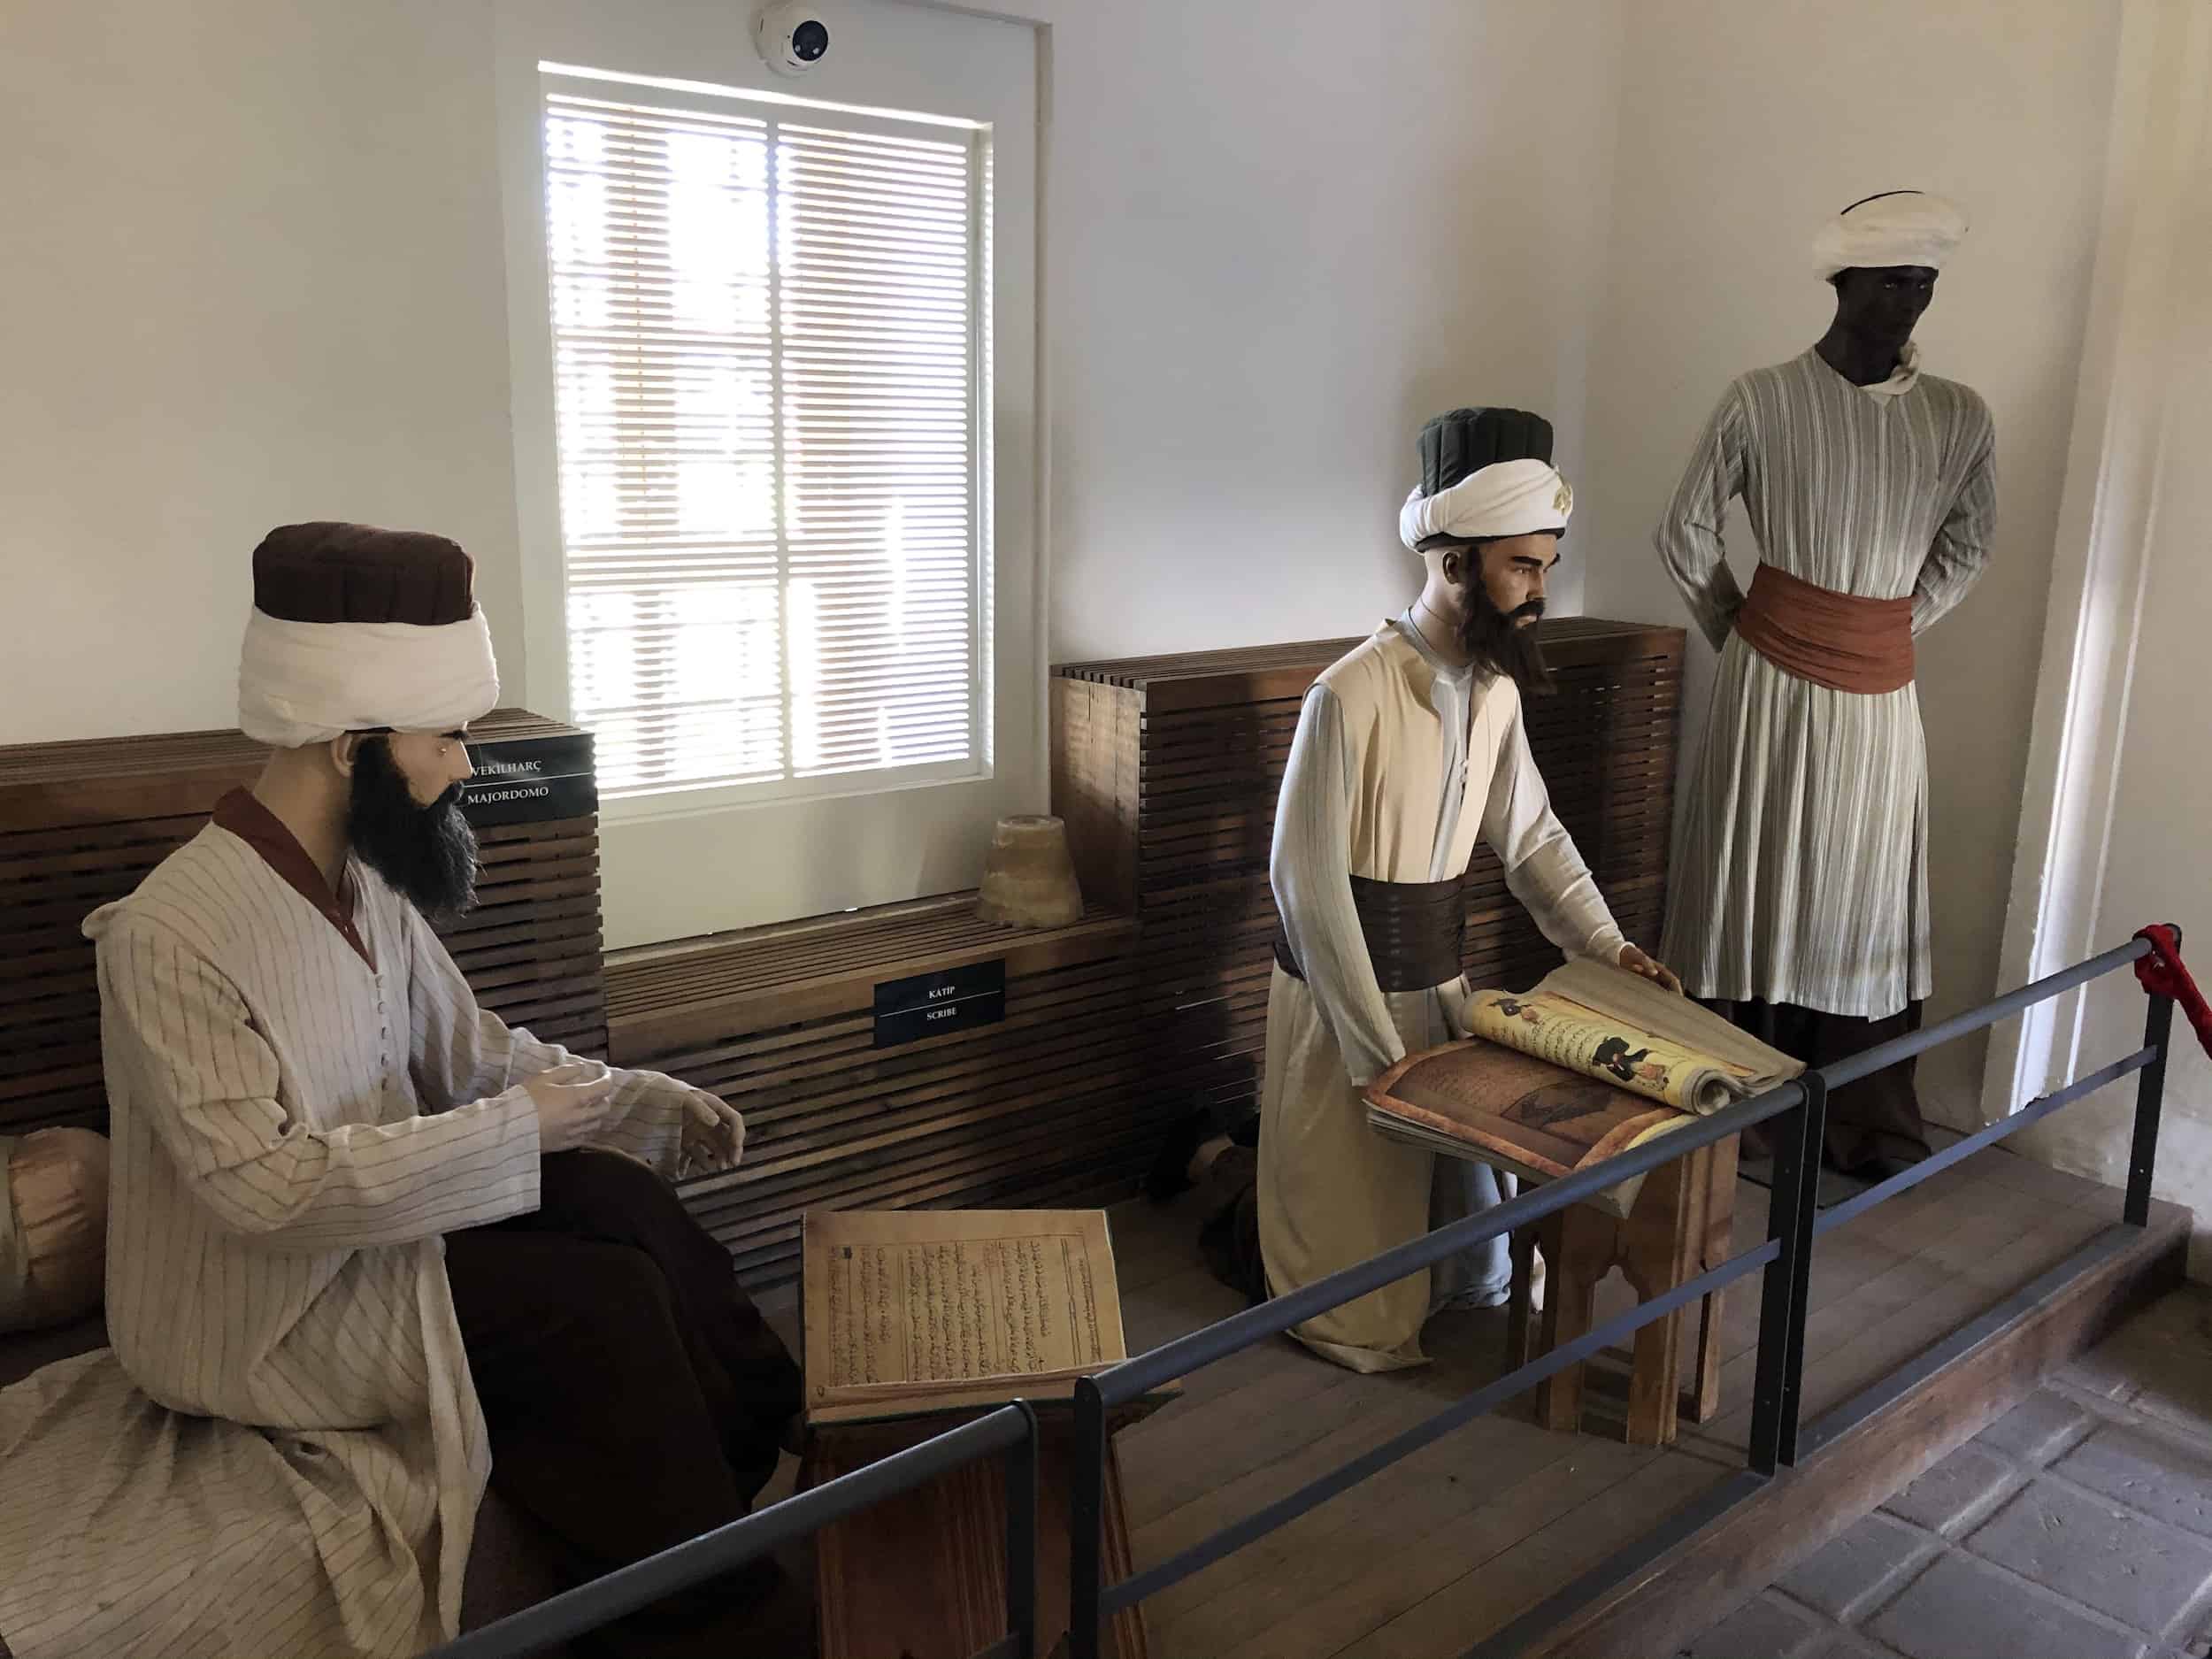 Administrative staff at the Complex of Bayezid II Health Museum in Edirne, Turkey